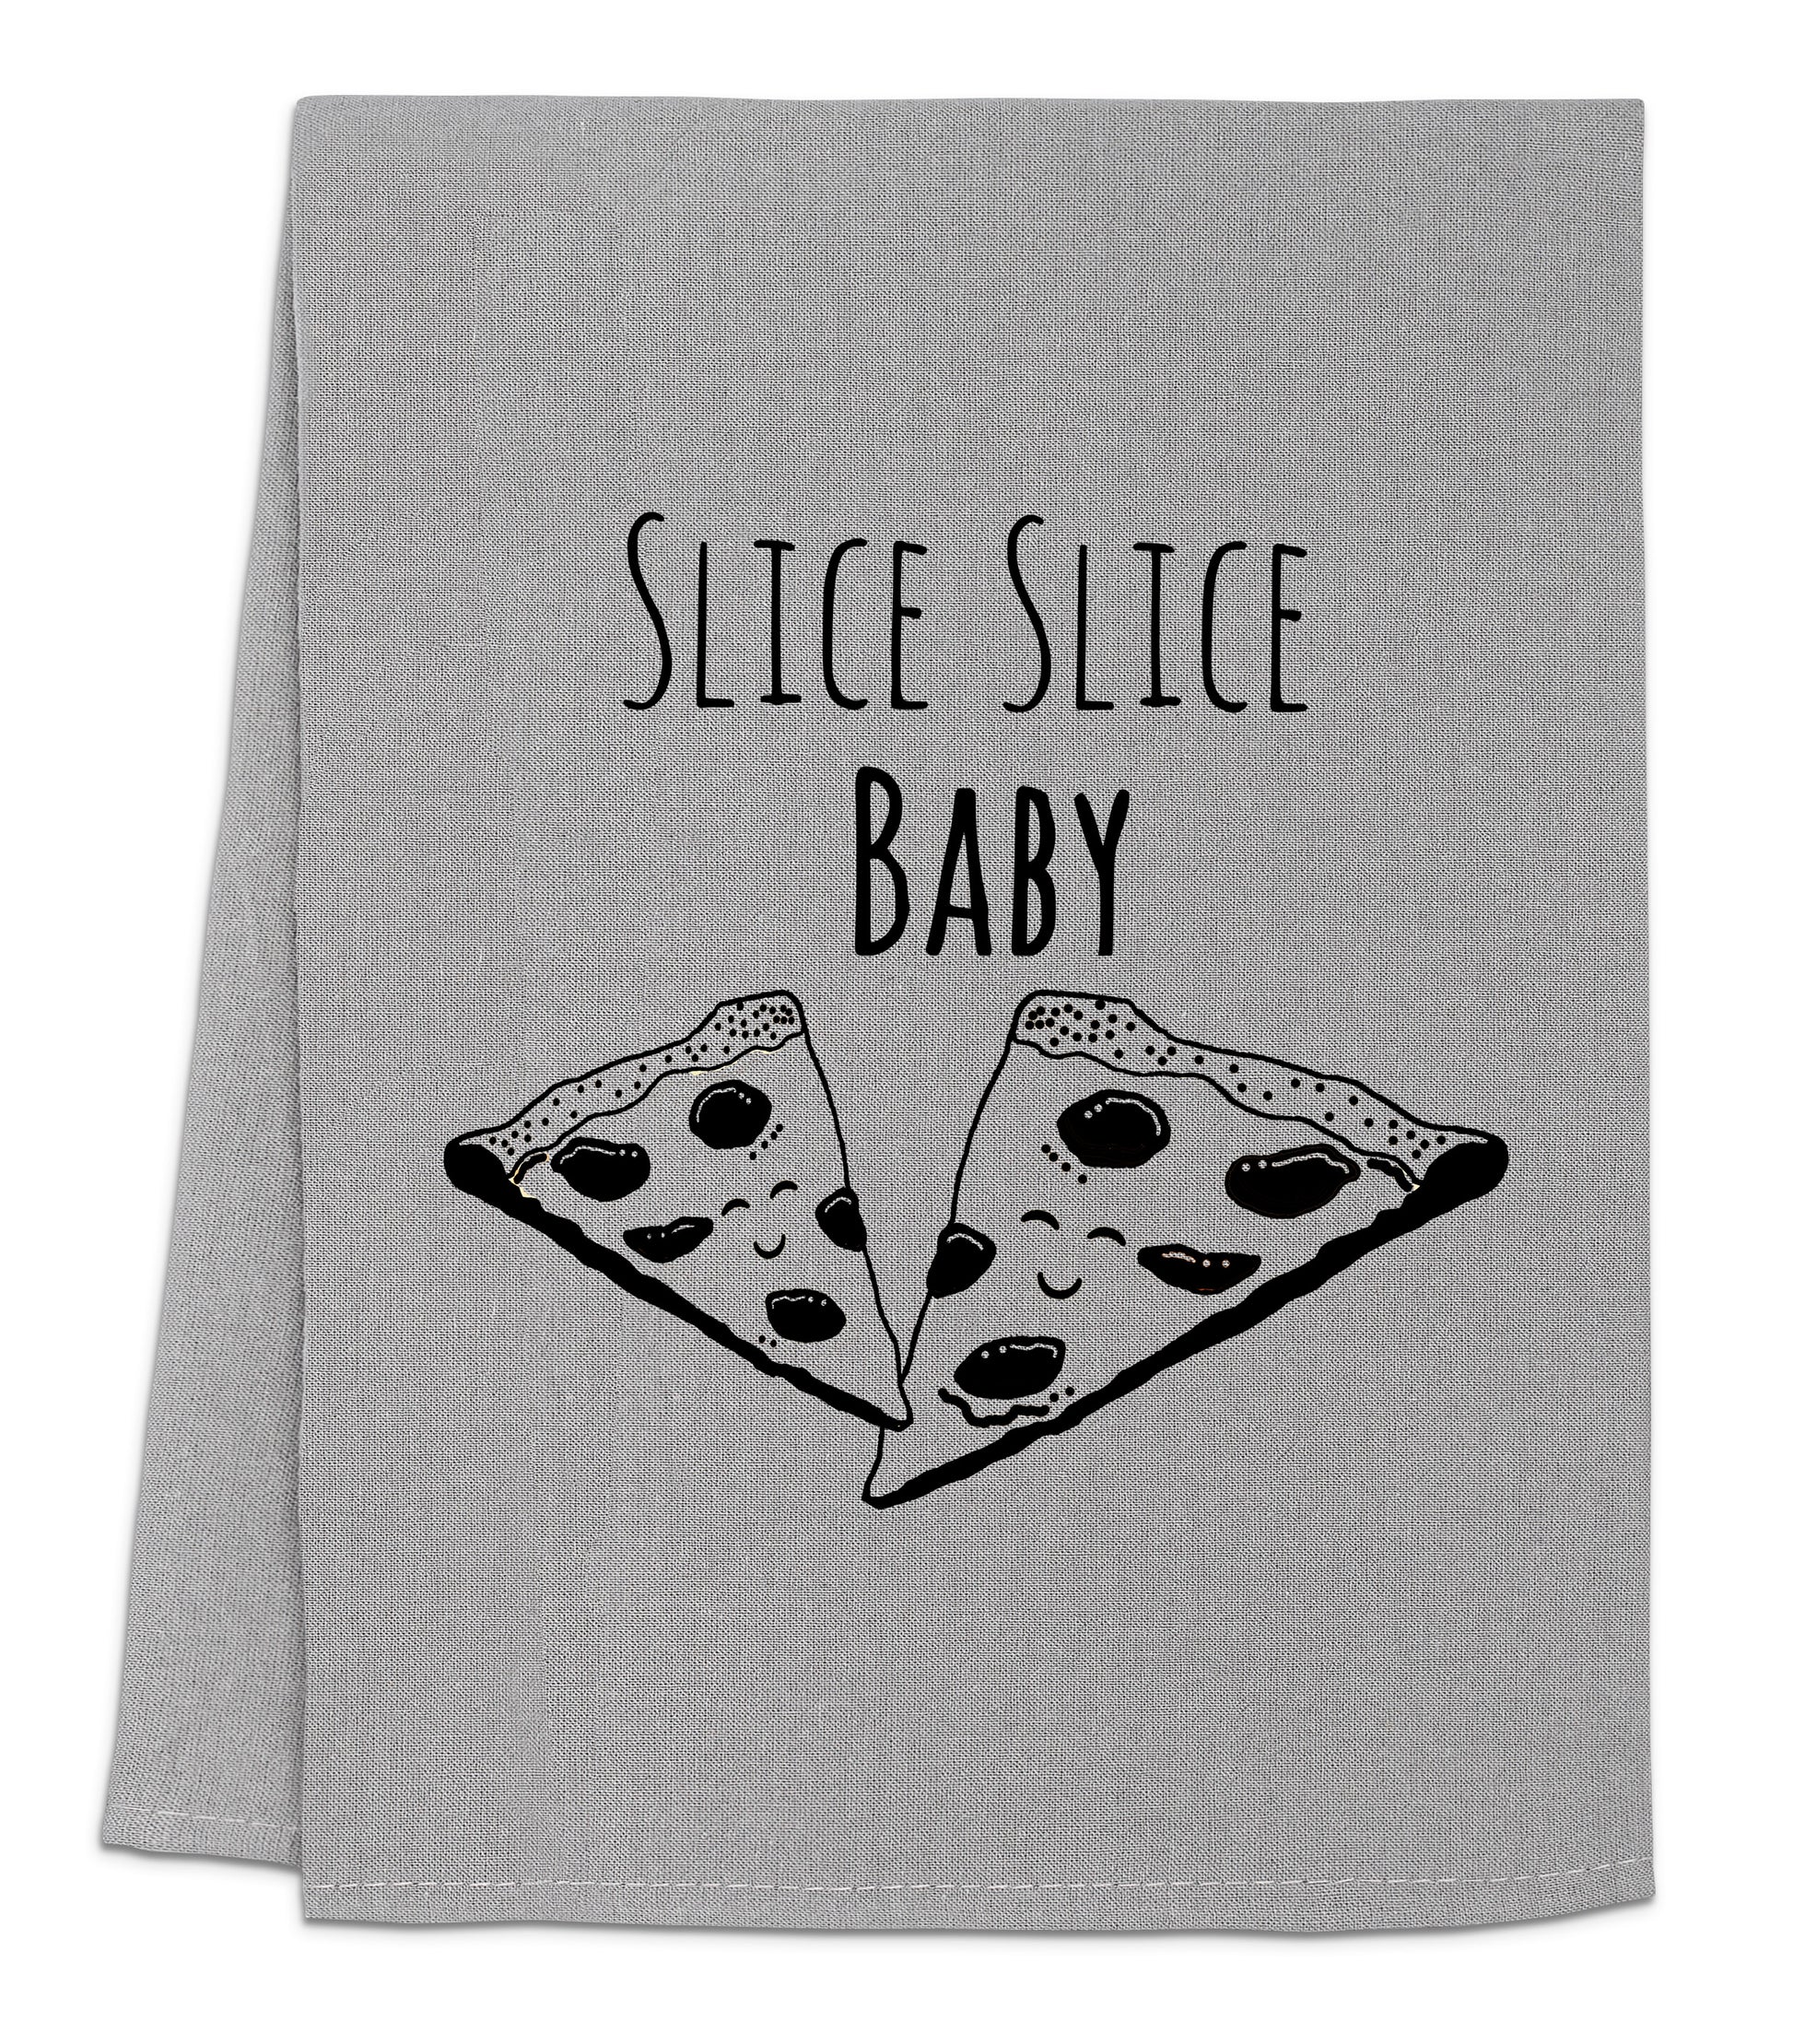 a towel with two slices of pizza printed on it